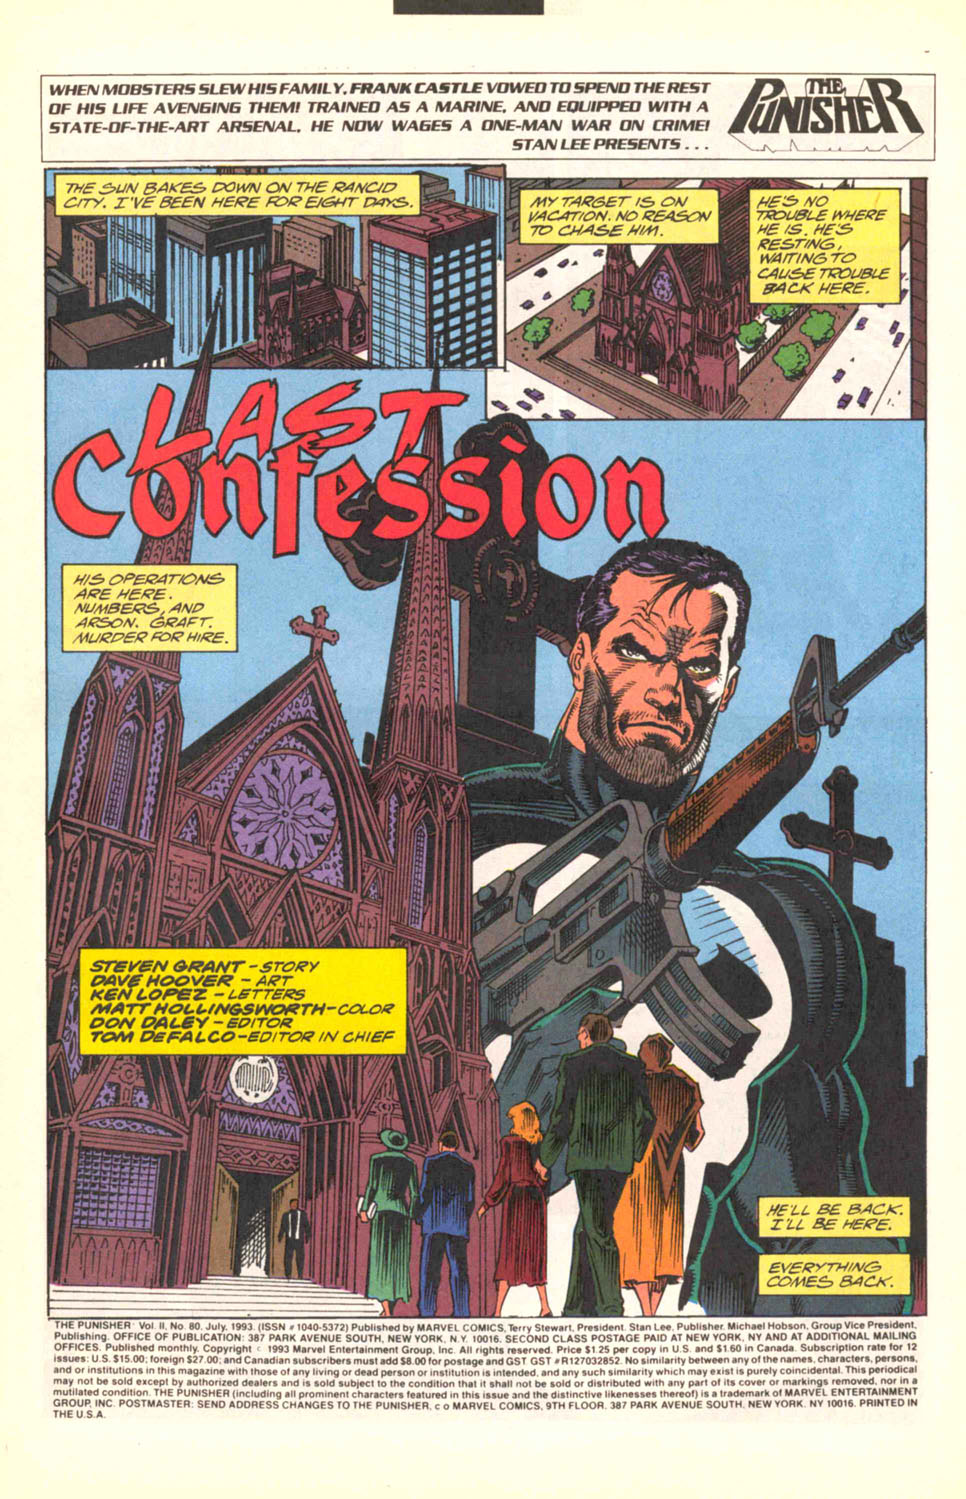 The Punisher (1987) Issue #80 - Last Confession #87 - English 2